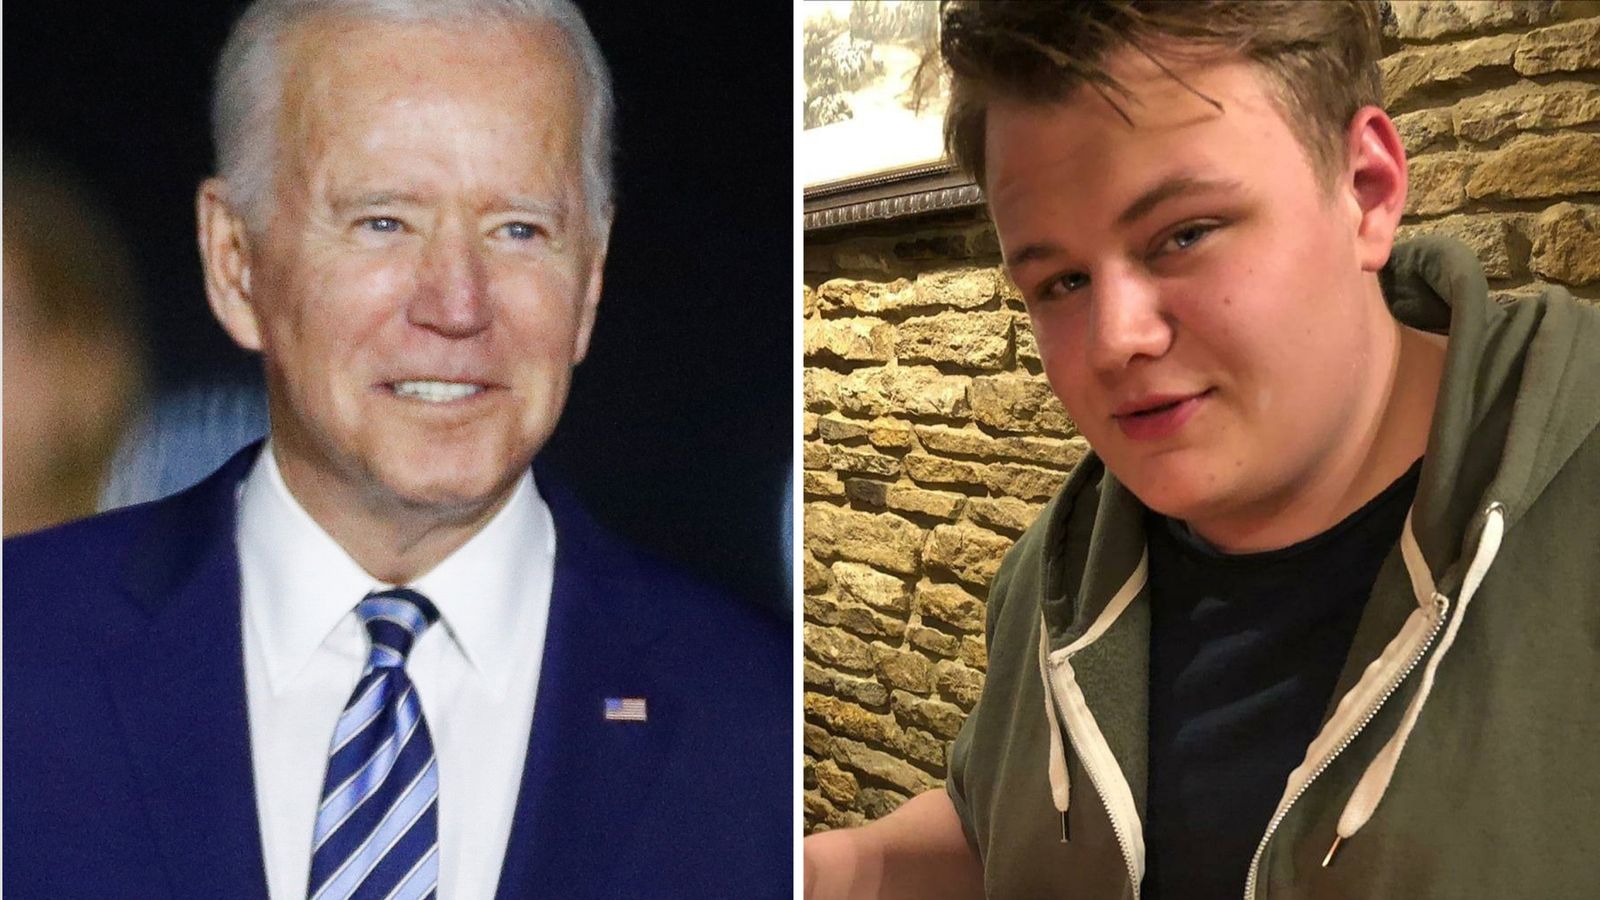 Harry Dunn’s mother calls on Joe Biden to ‘put the wrong right’ and meet with her while he’s in UK